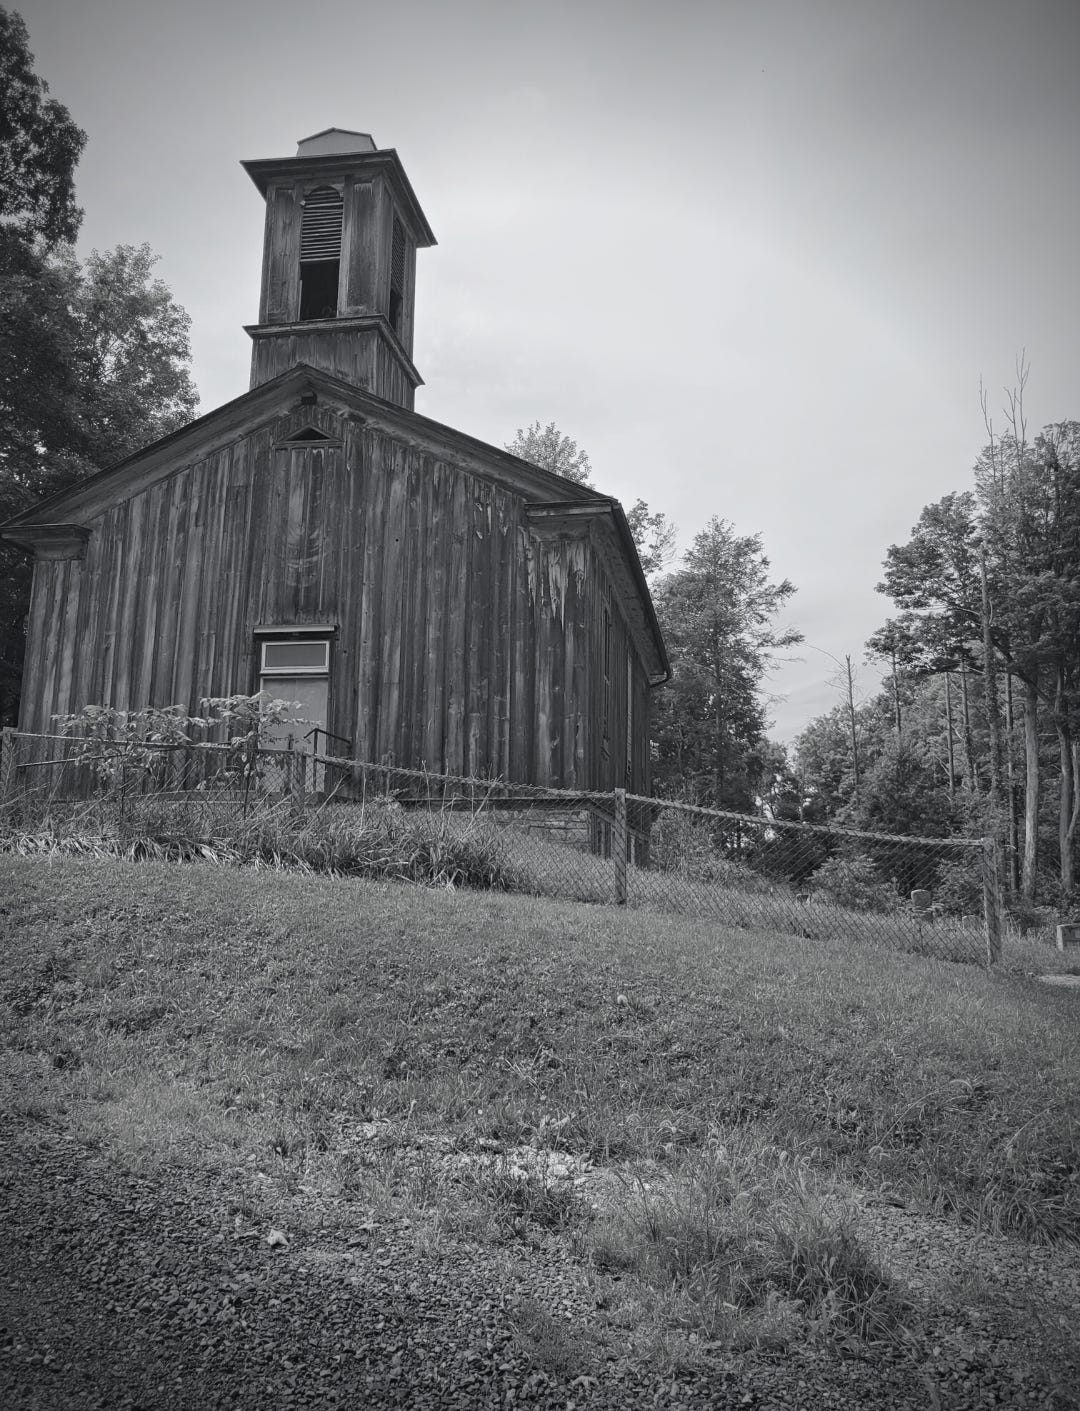 Black and white photo of a rundown church surrounded by trees.